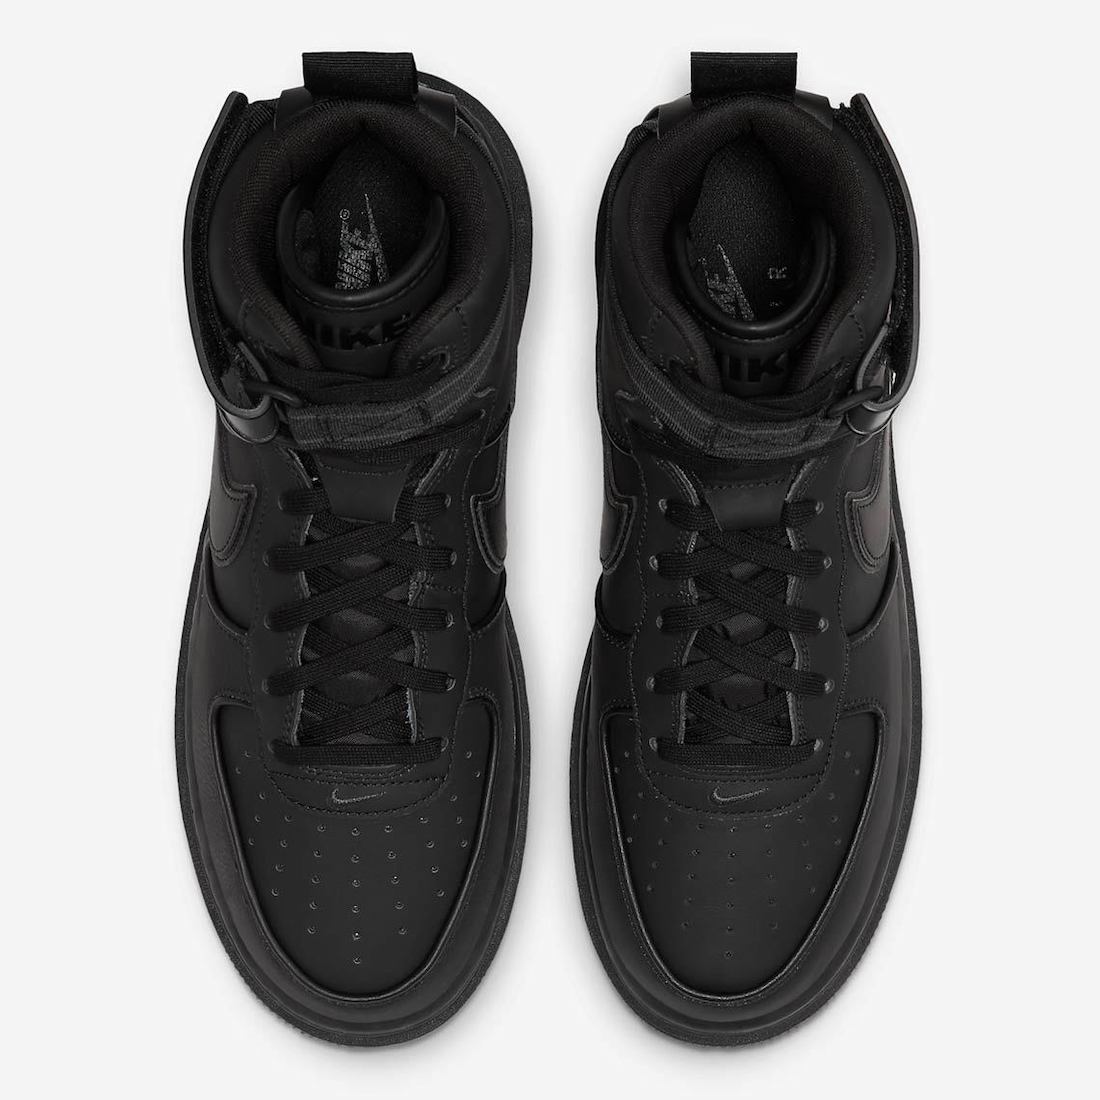 nike air force black boots